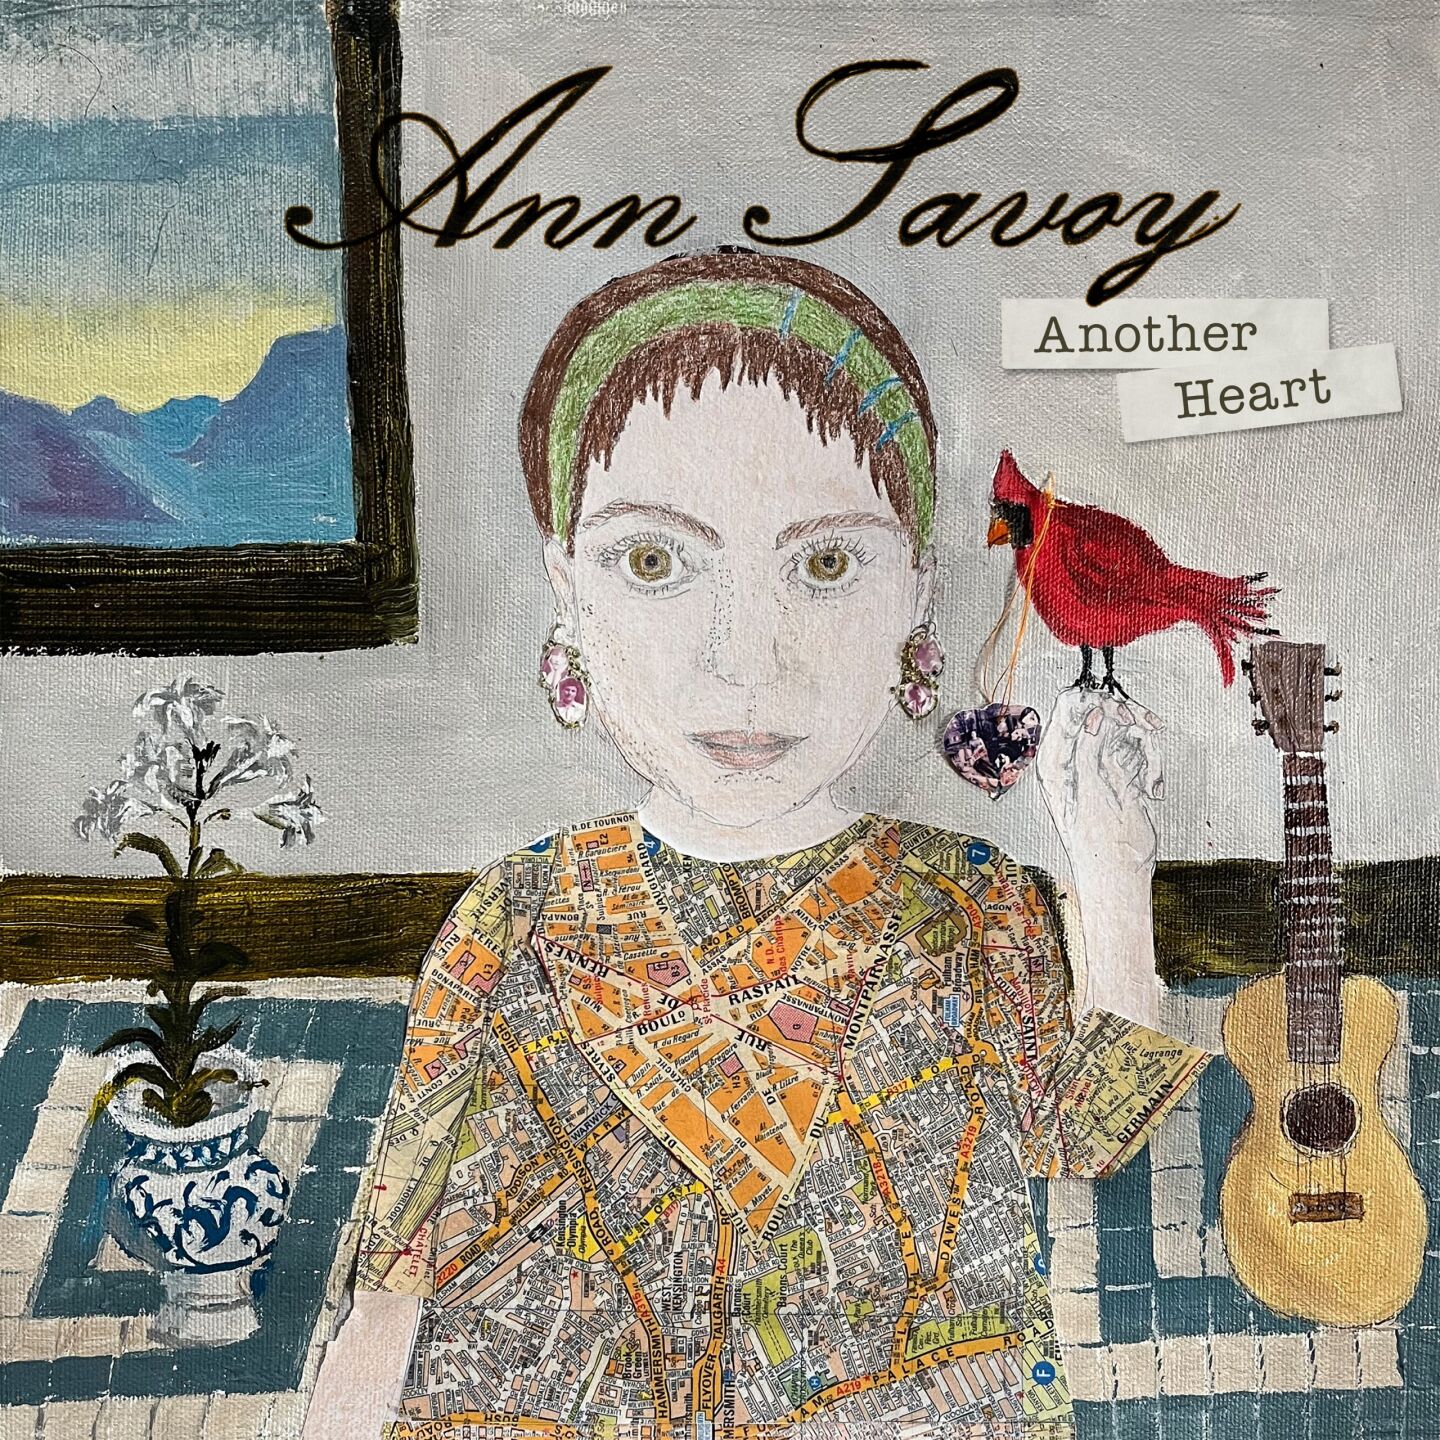 Ann Savoy revisits her Virginia roots with new album | Music 